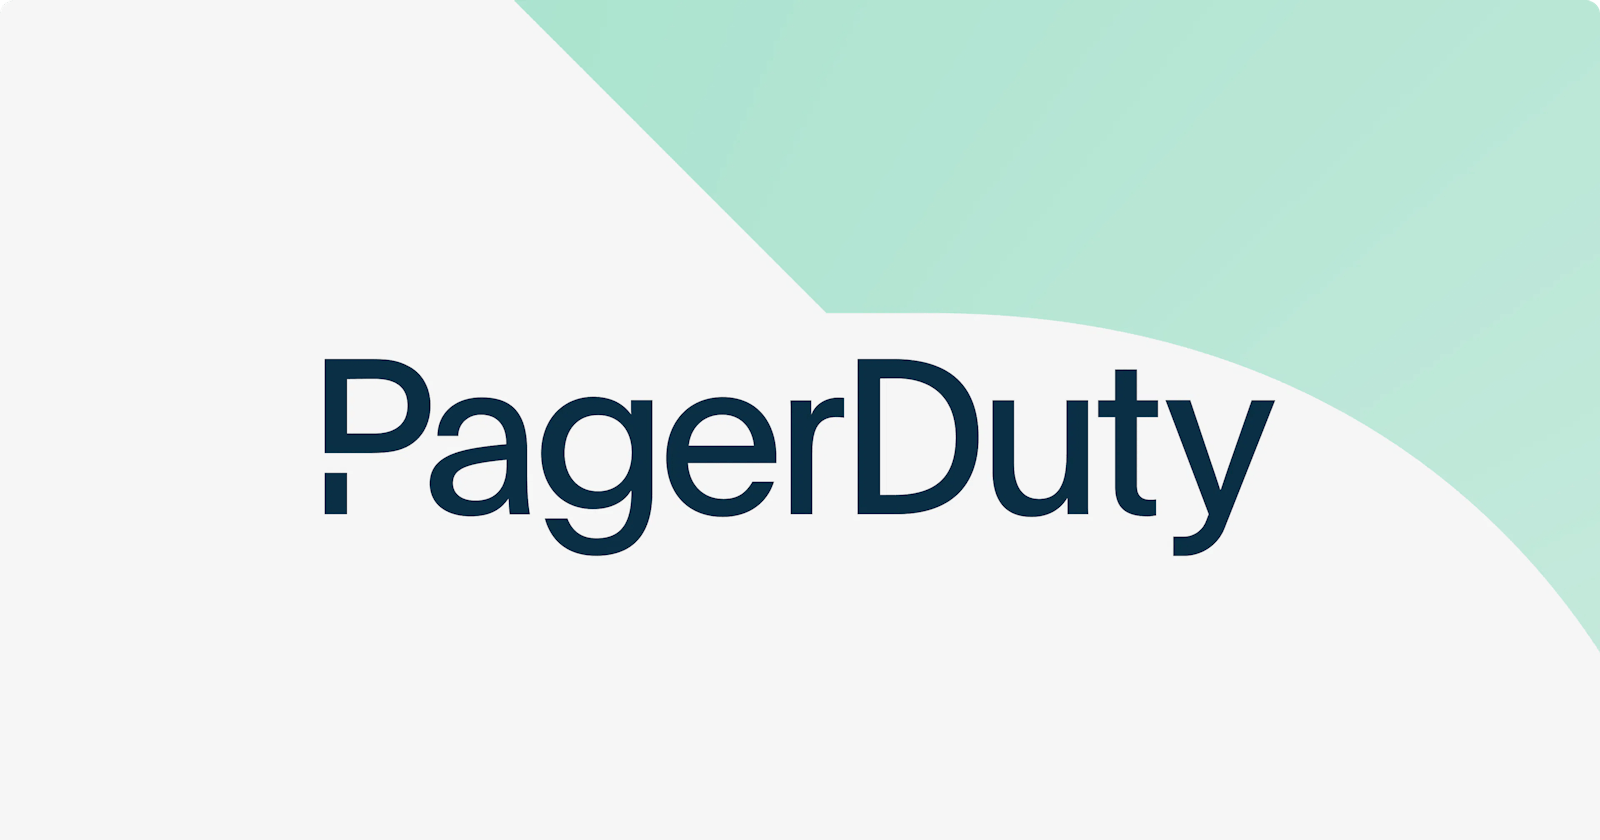 PagerDuty: Streamlining Incident Response and Management